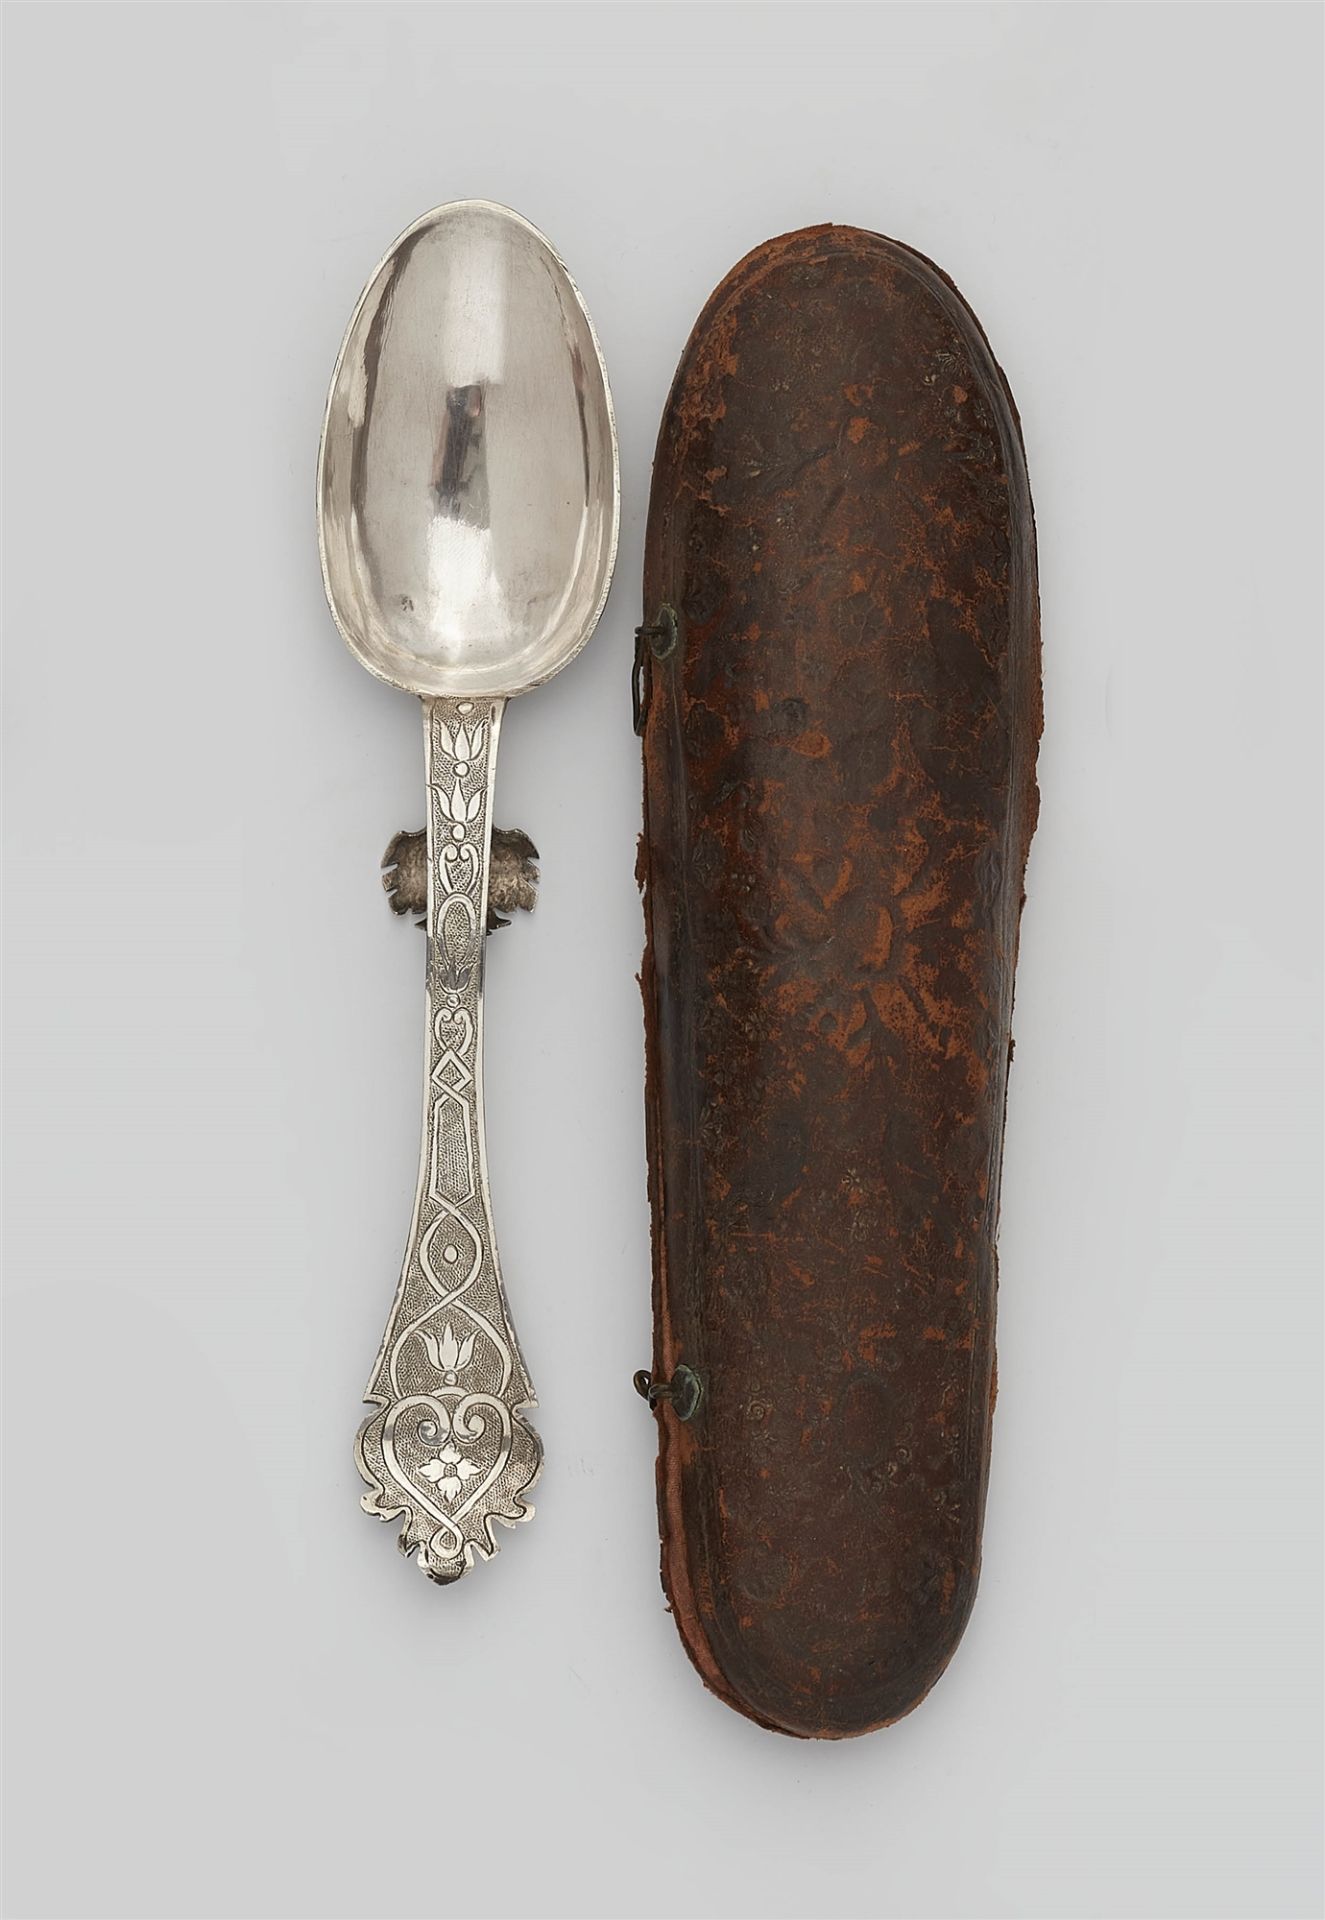 A Nuremberg silver spoon in a fitted case